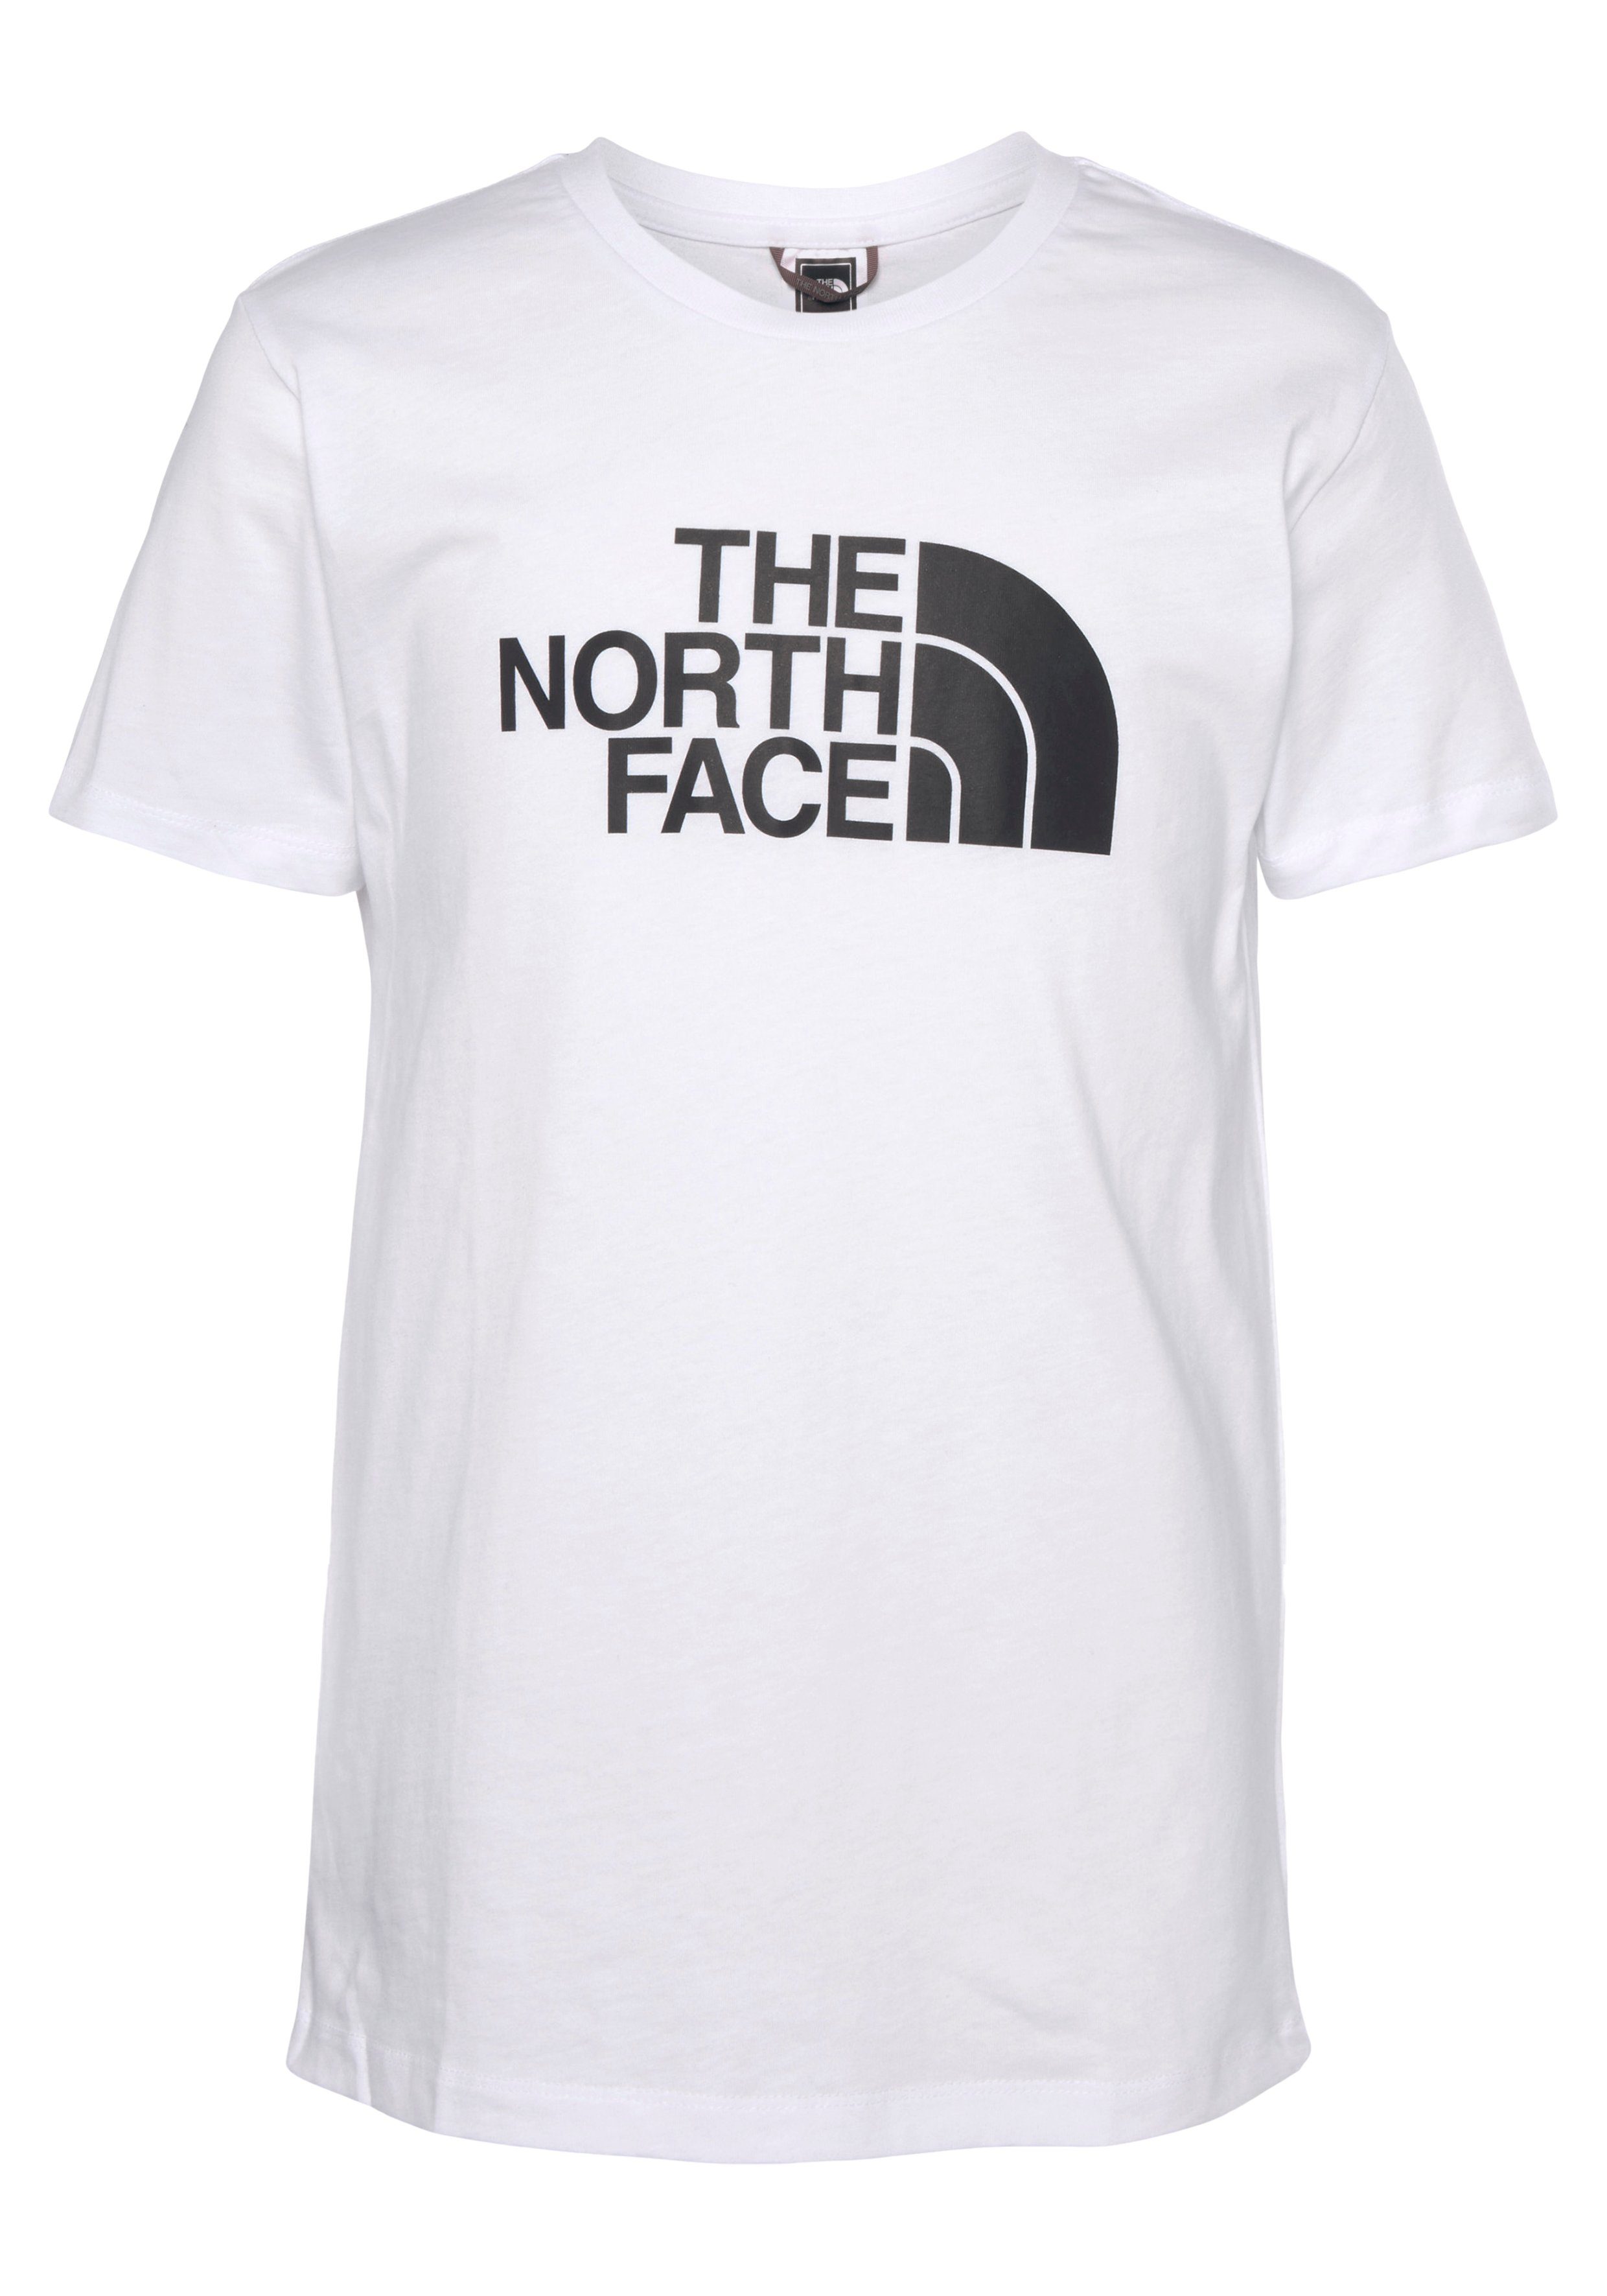 - Kinder T-Shirt Face EASY white für TEE North The